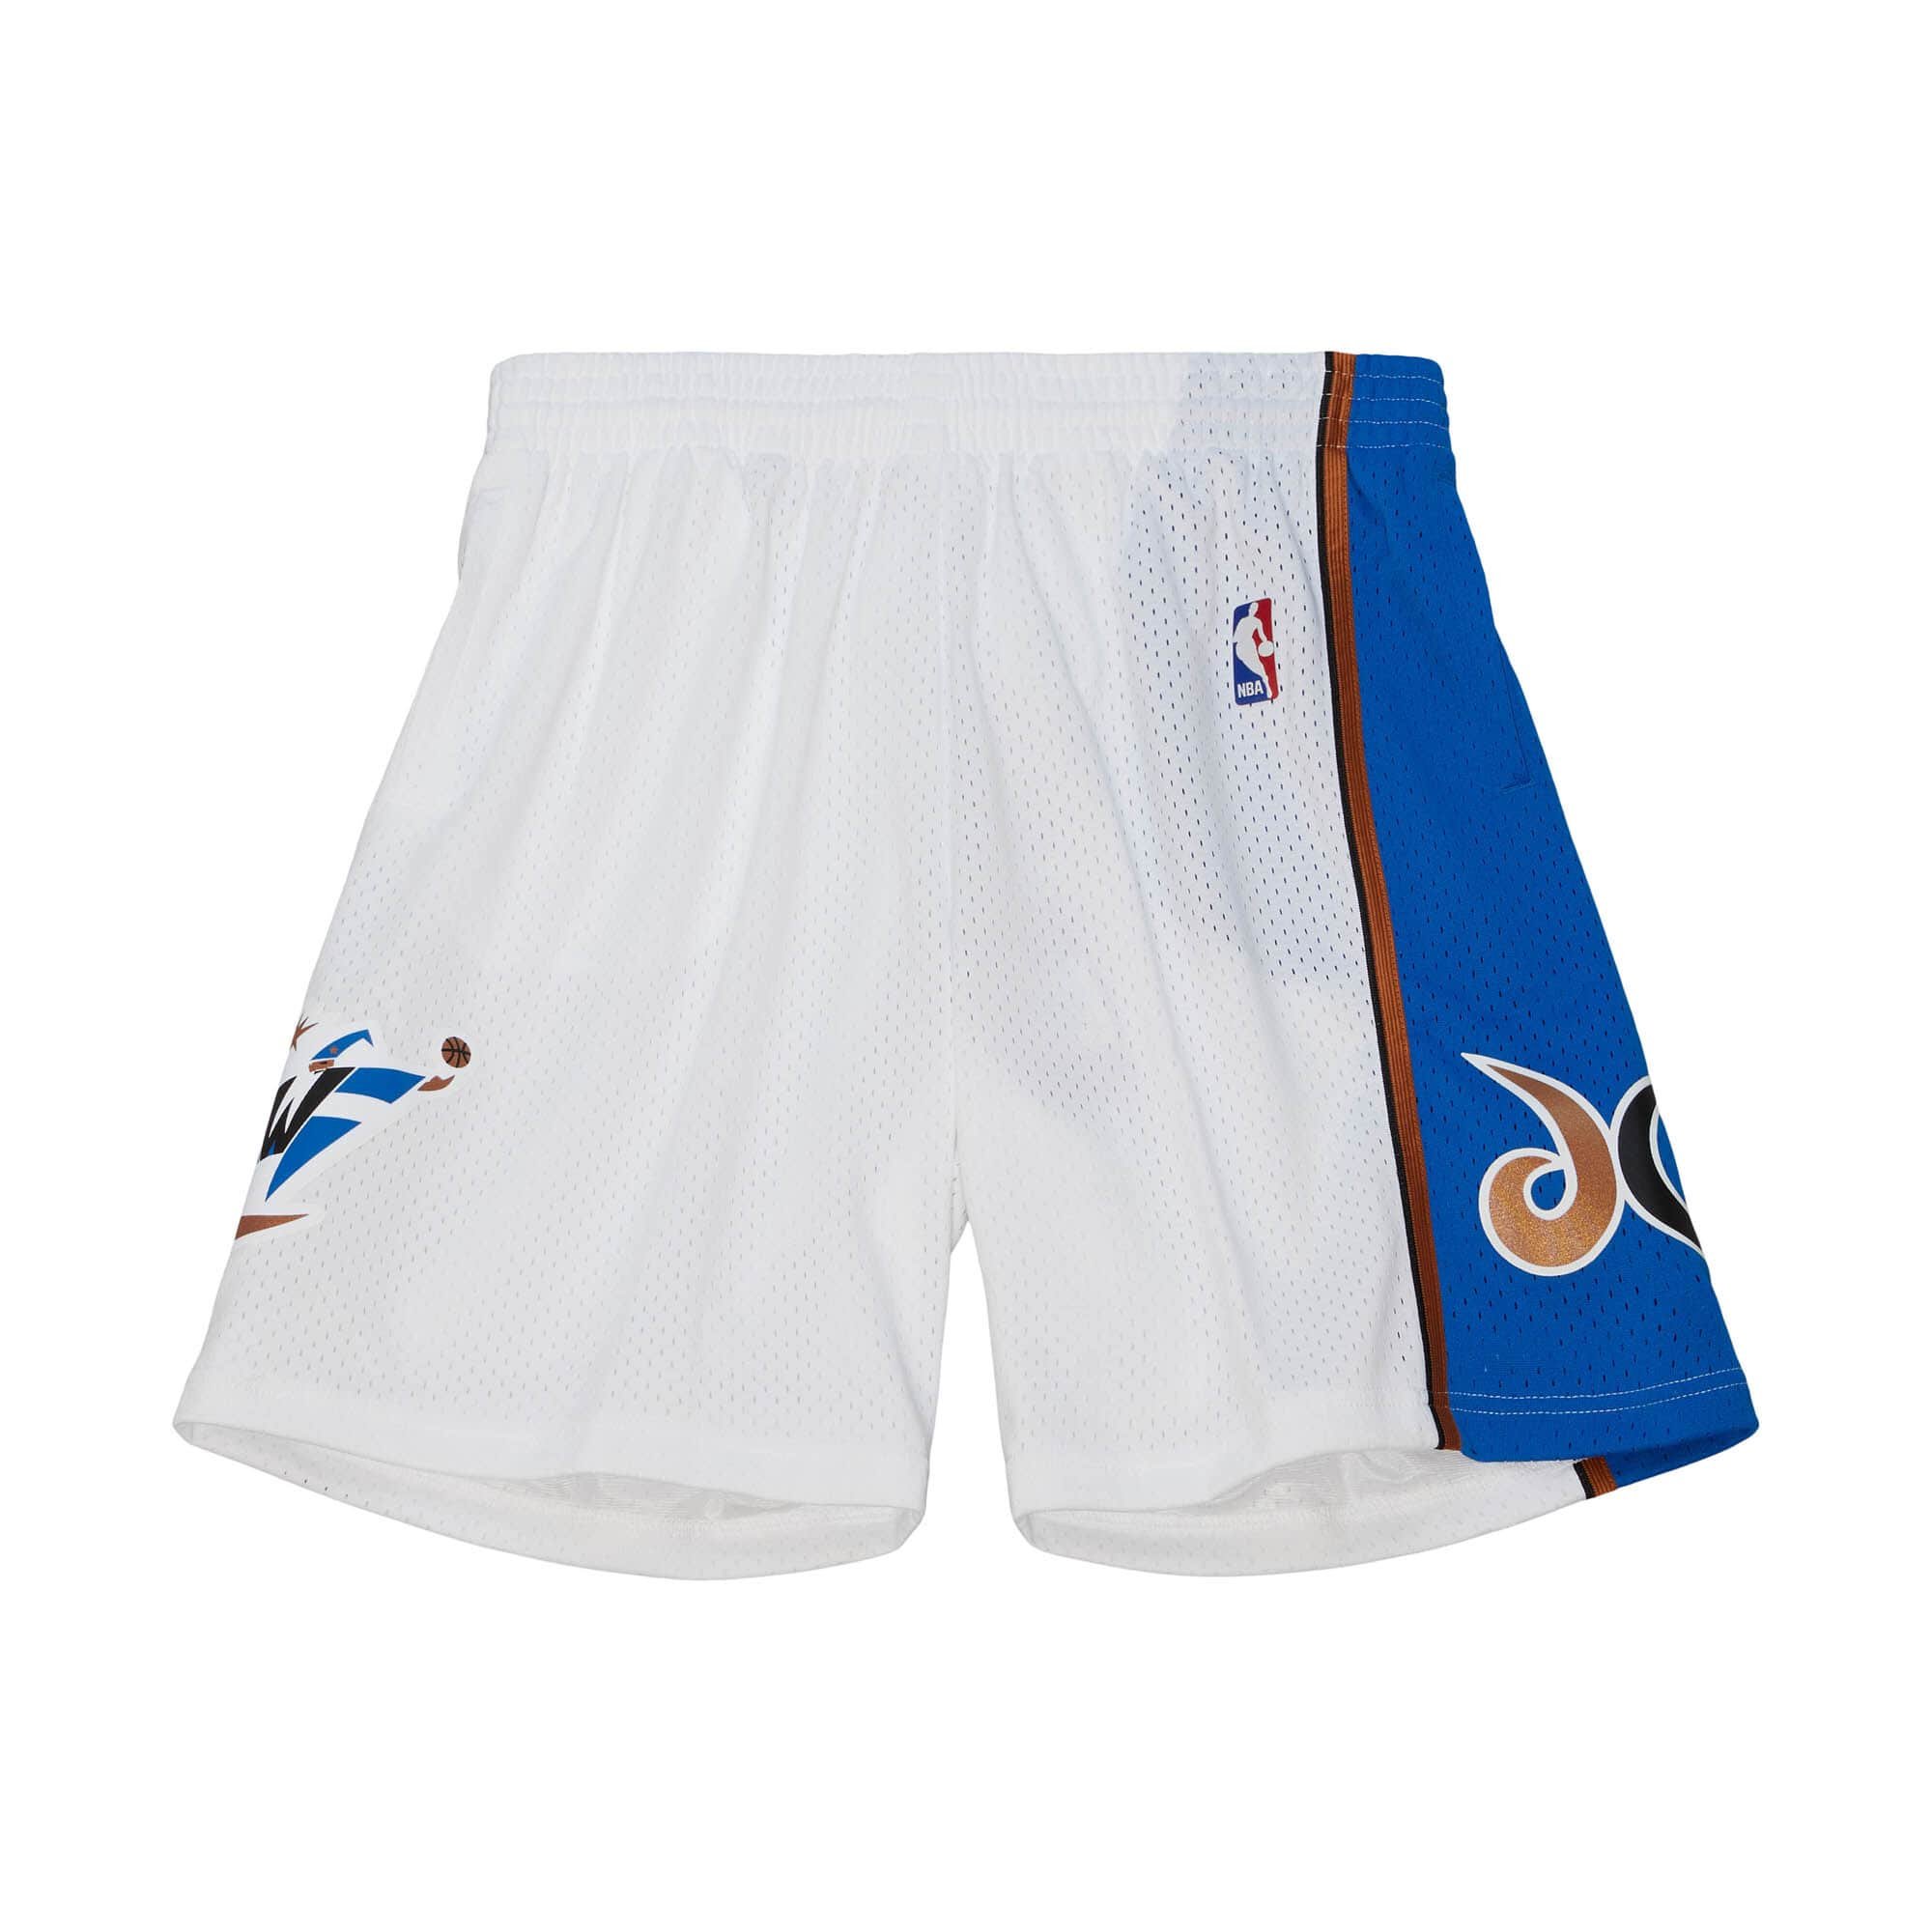 mitchell and ness vintage nba shorts